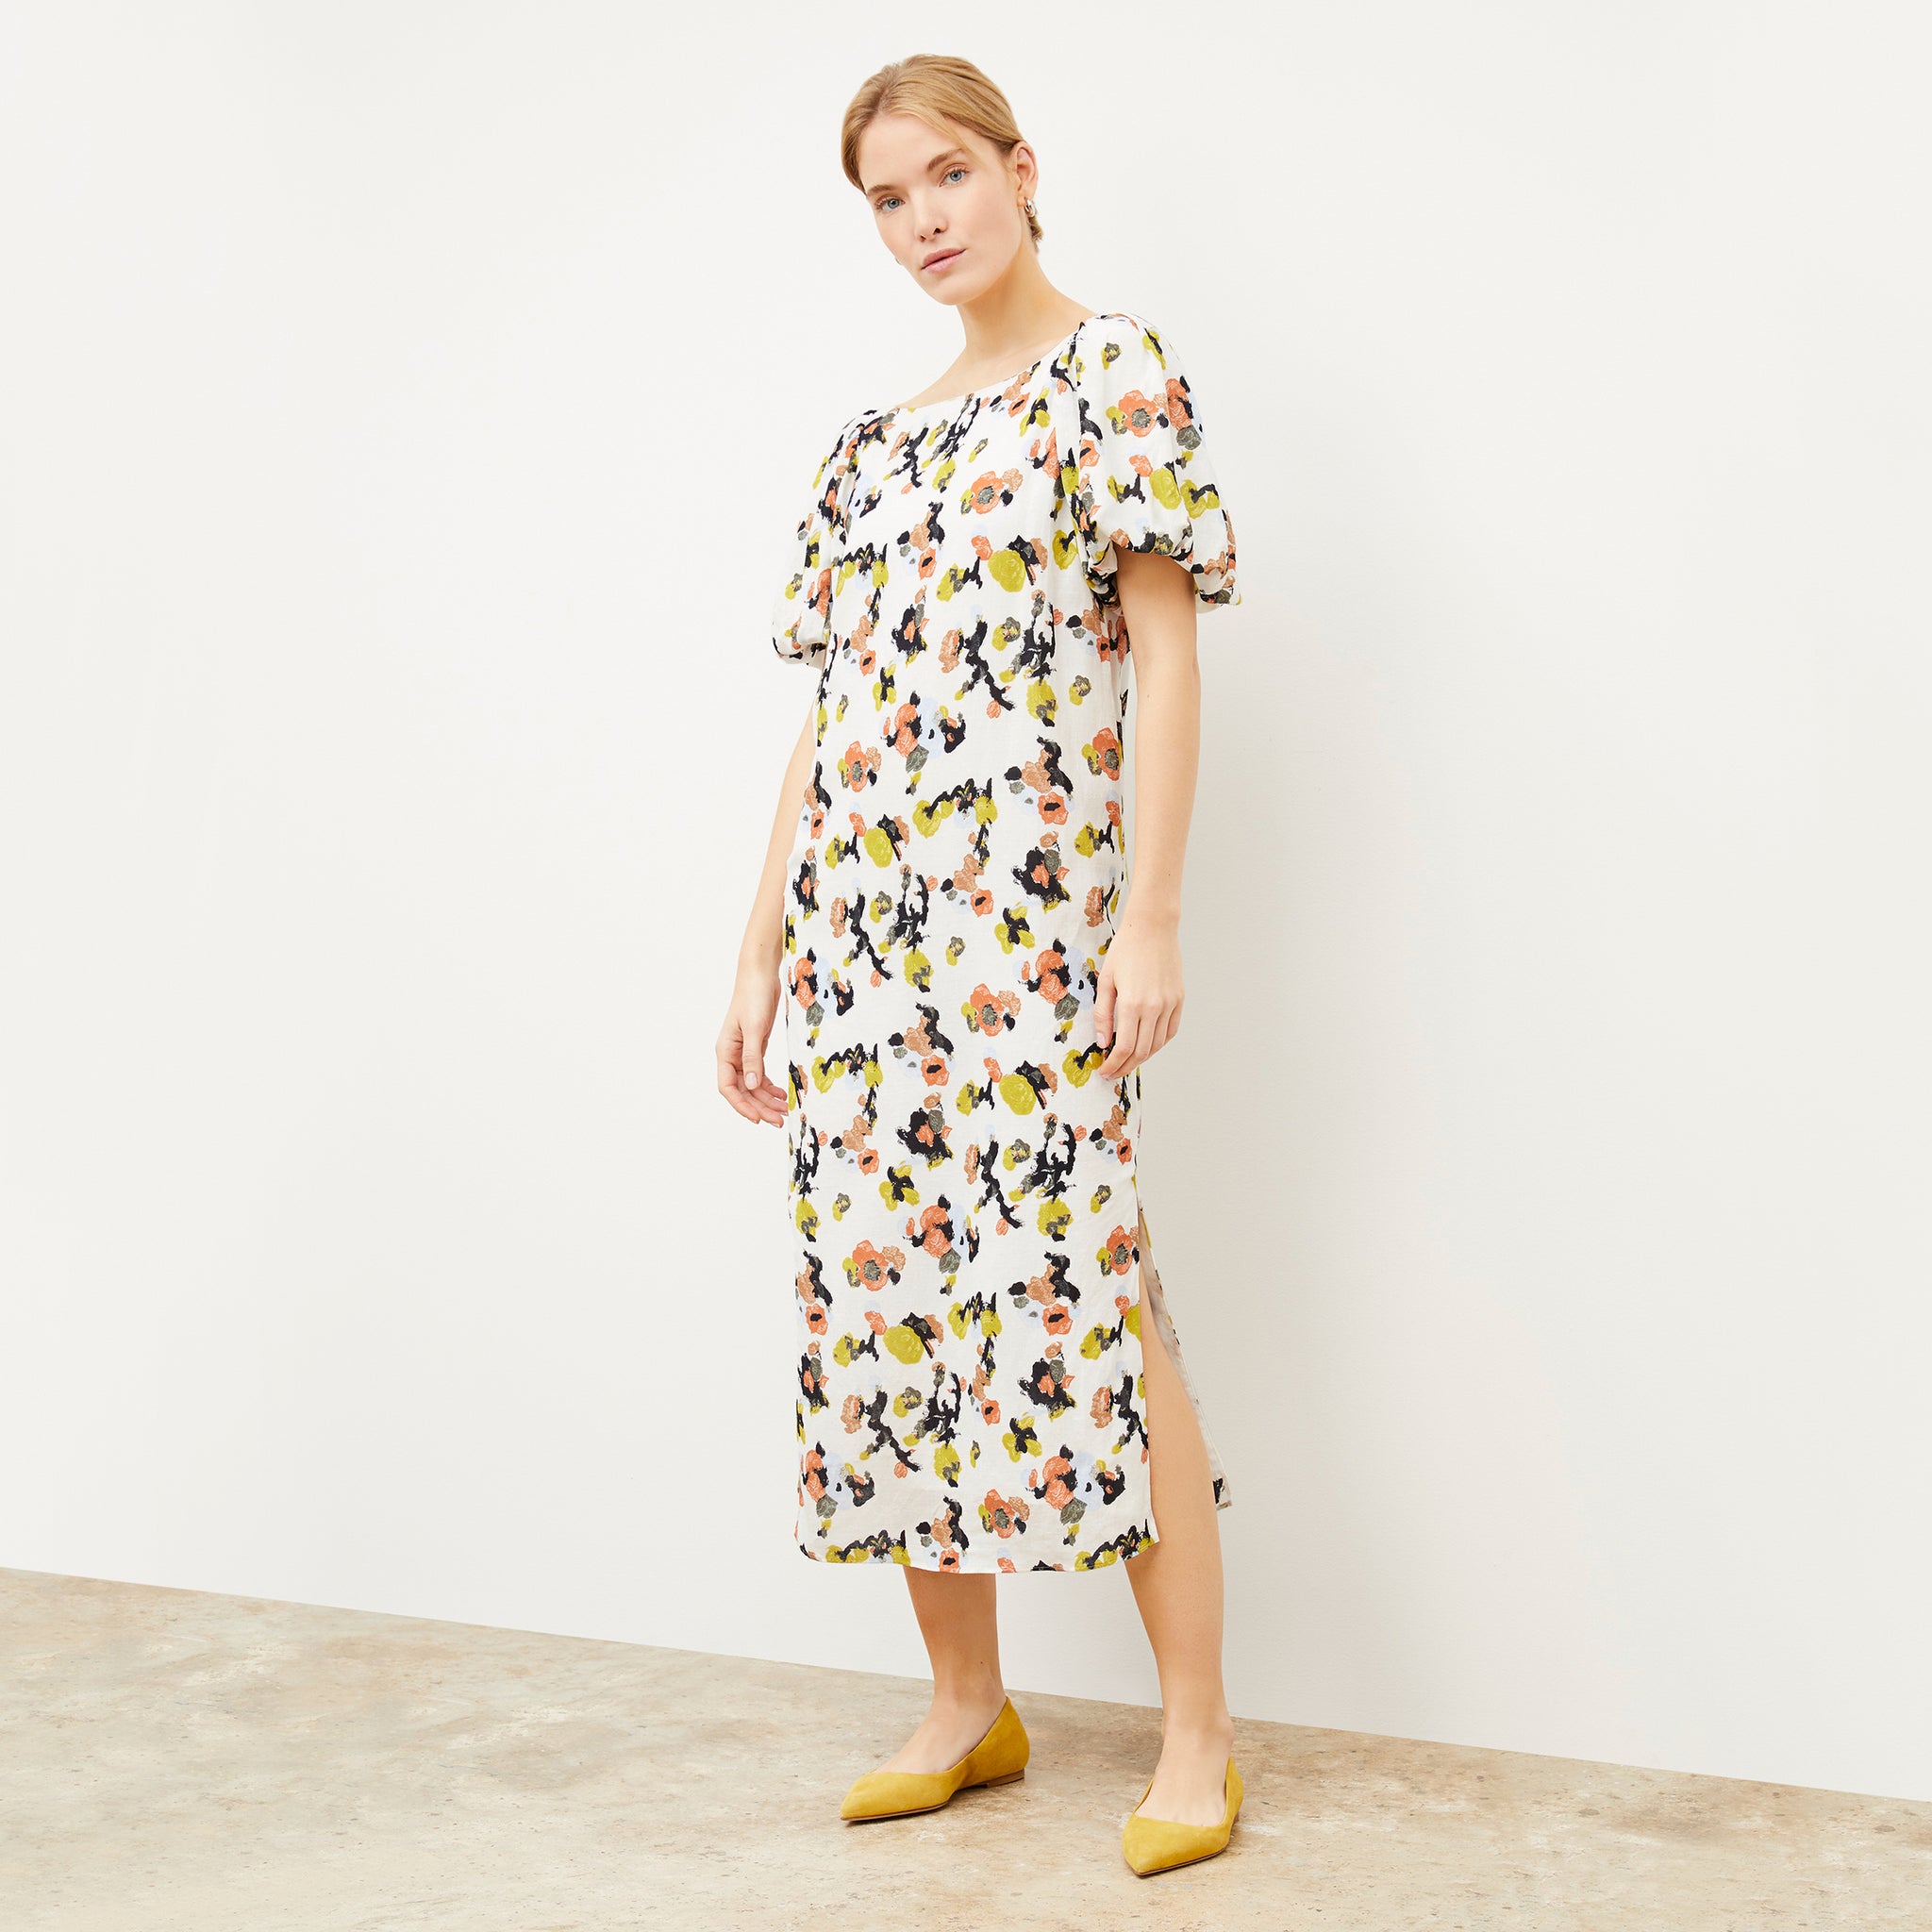 Front image of a woman wearing the Gali dress in meadow print linen